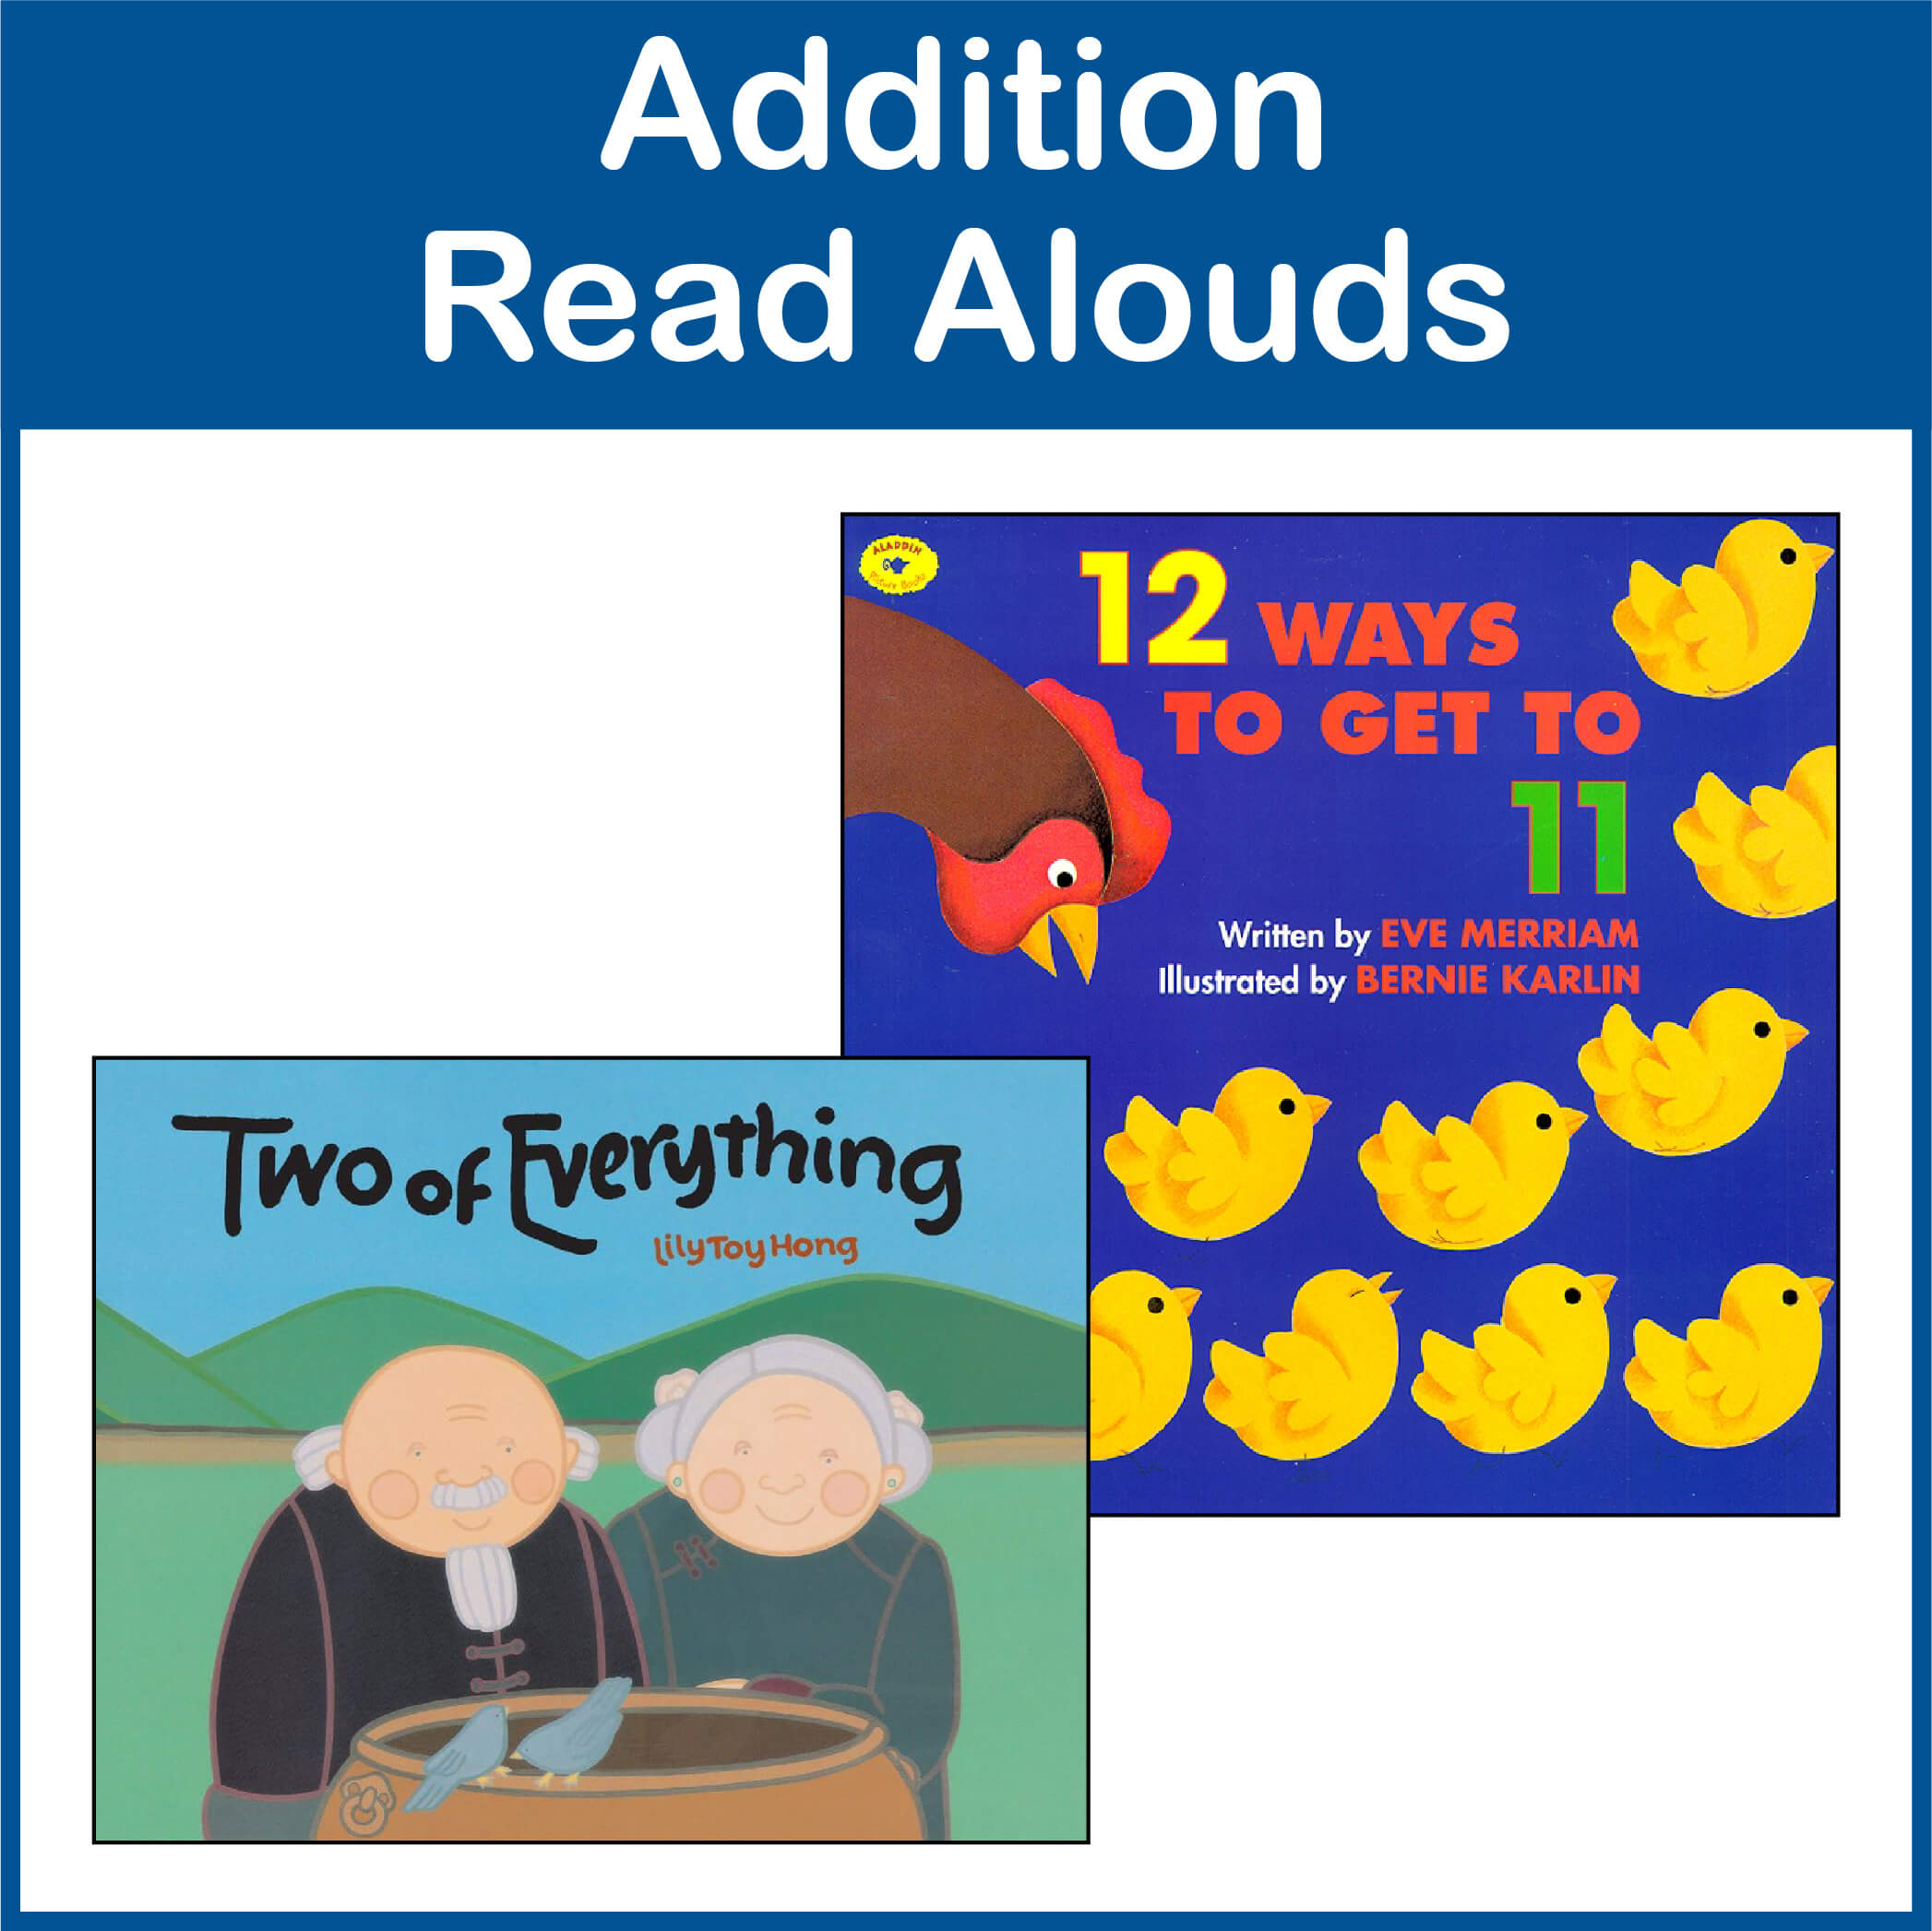 Addition Read Alouds